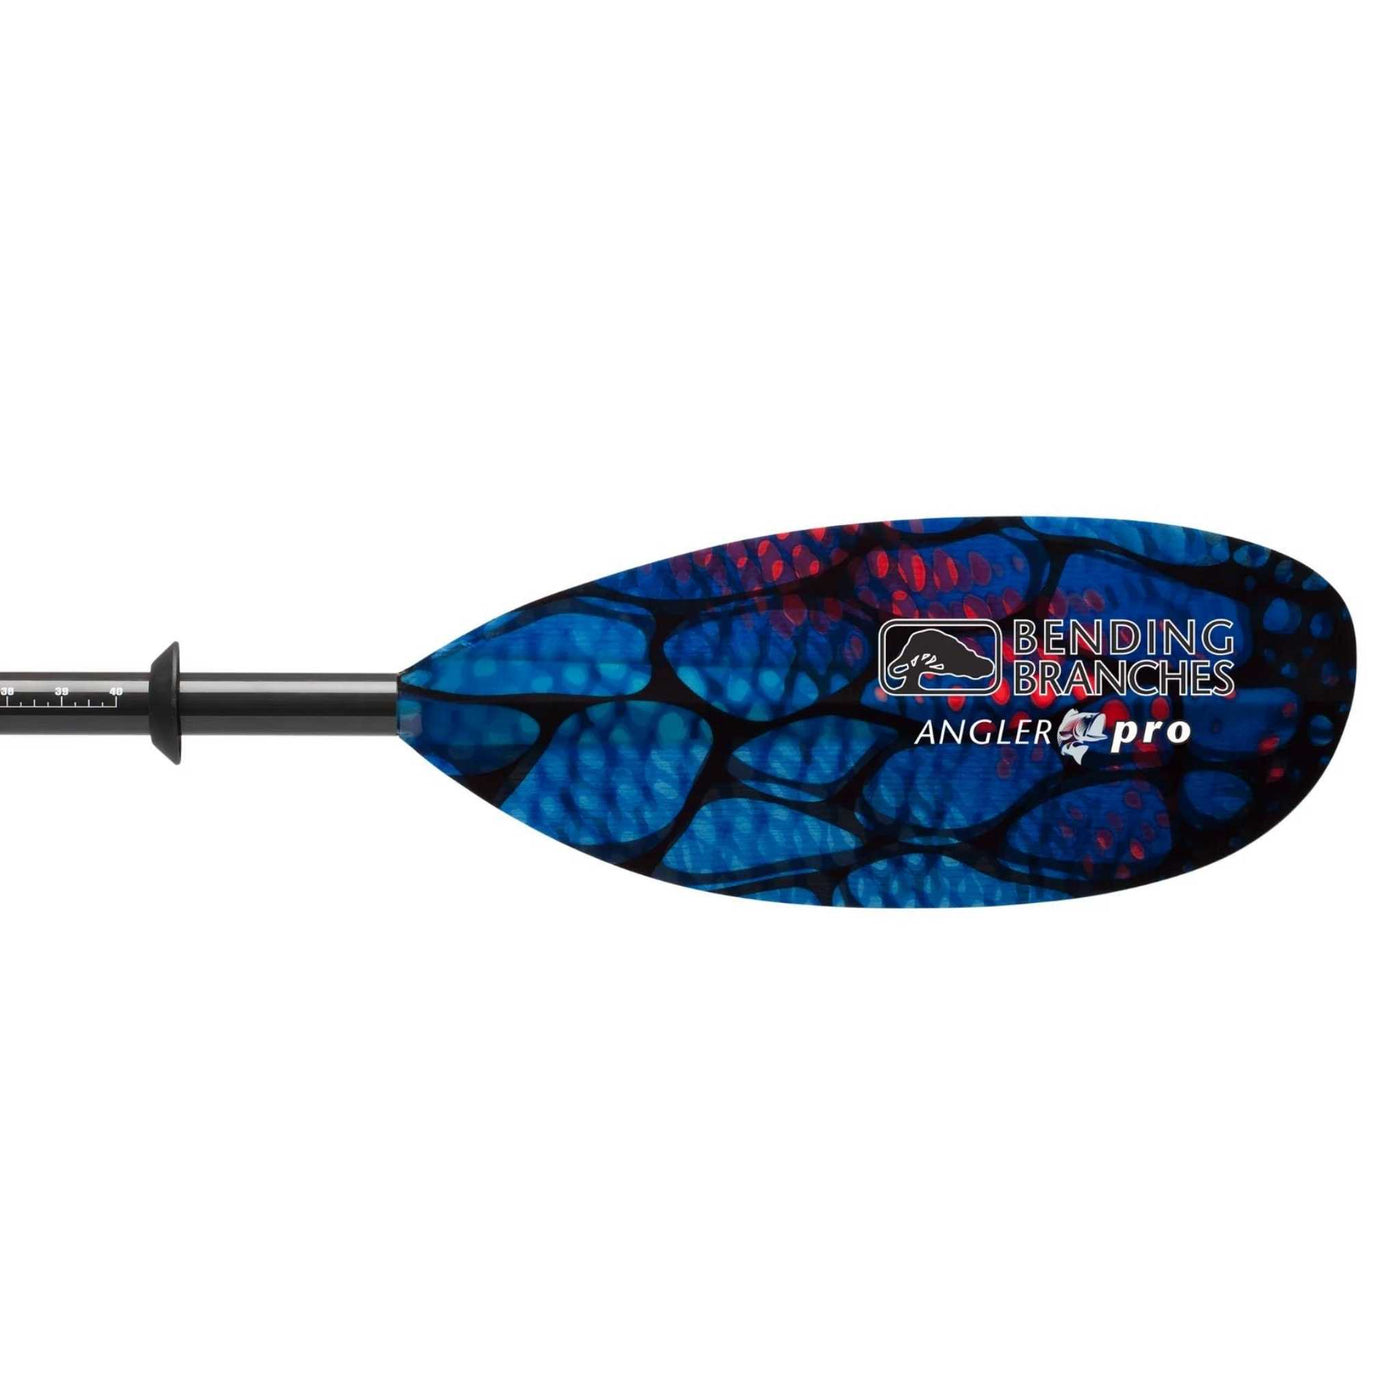 Bending Branches Angler Pro Plus - 230-245 cm | Kayaking Paddle | Further Faster Christchurch NZ #radiant-blue